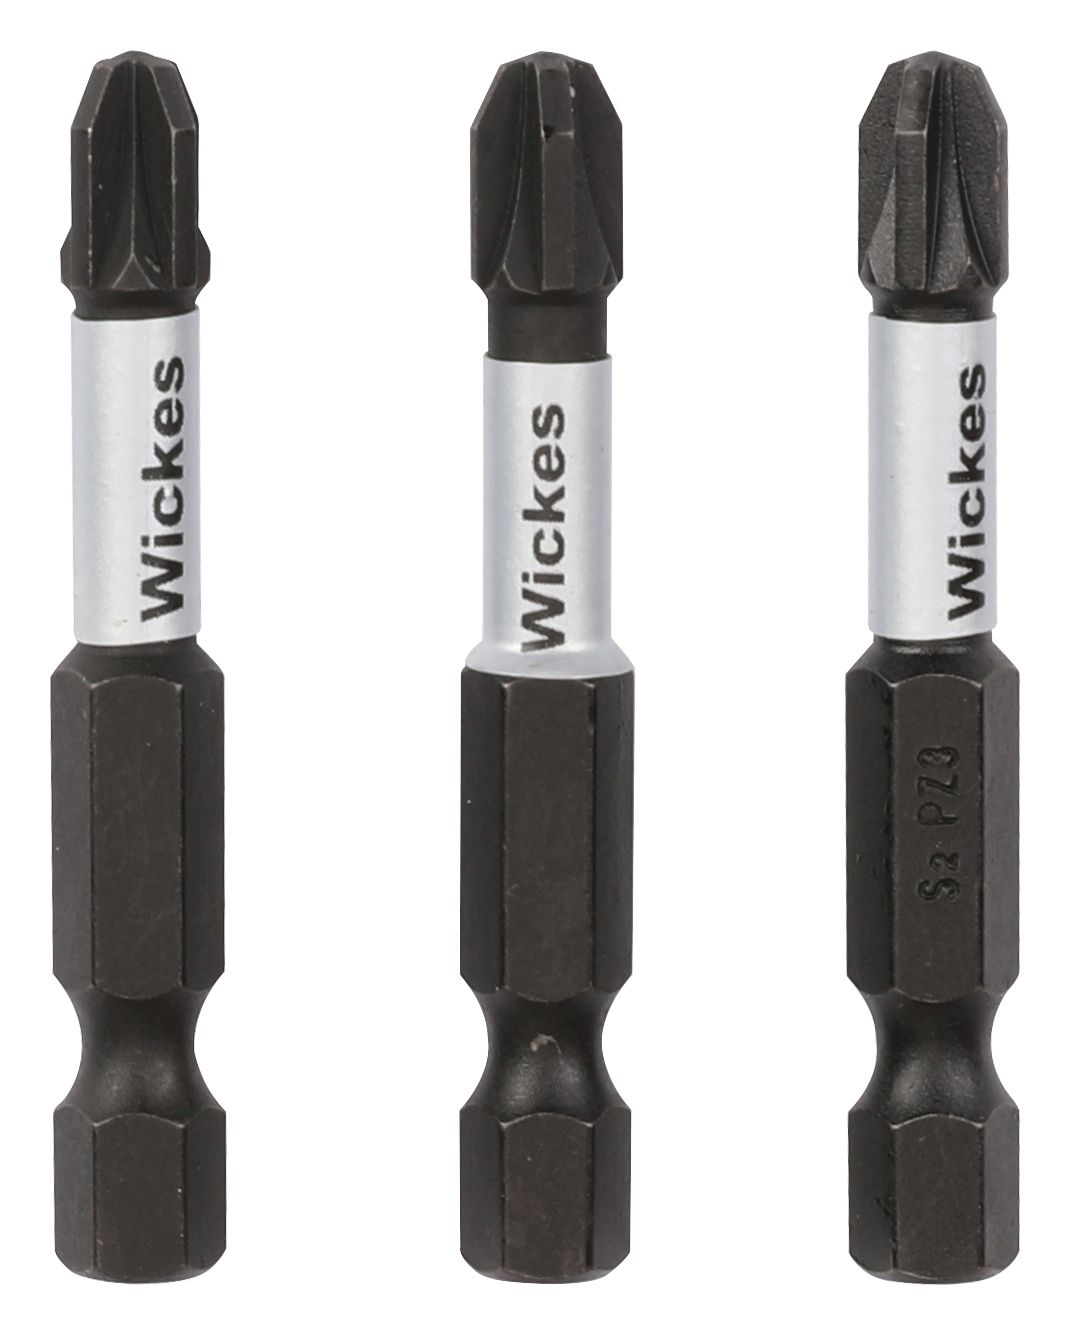 Image of Wickes Impact Screwdriver Bit PZ3 - 50mm - Pack of 3